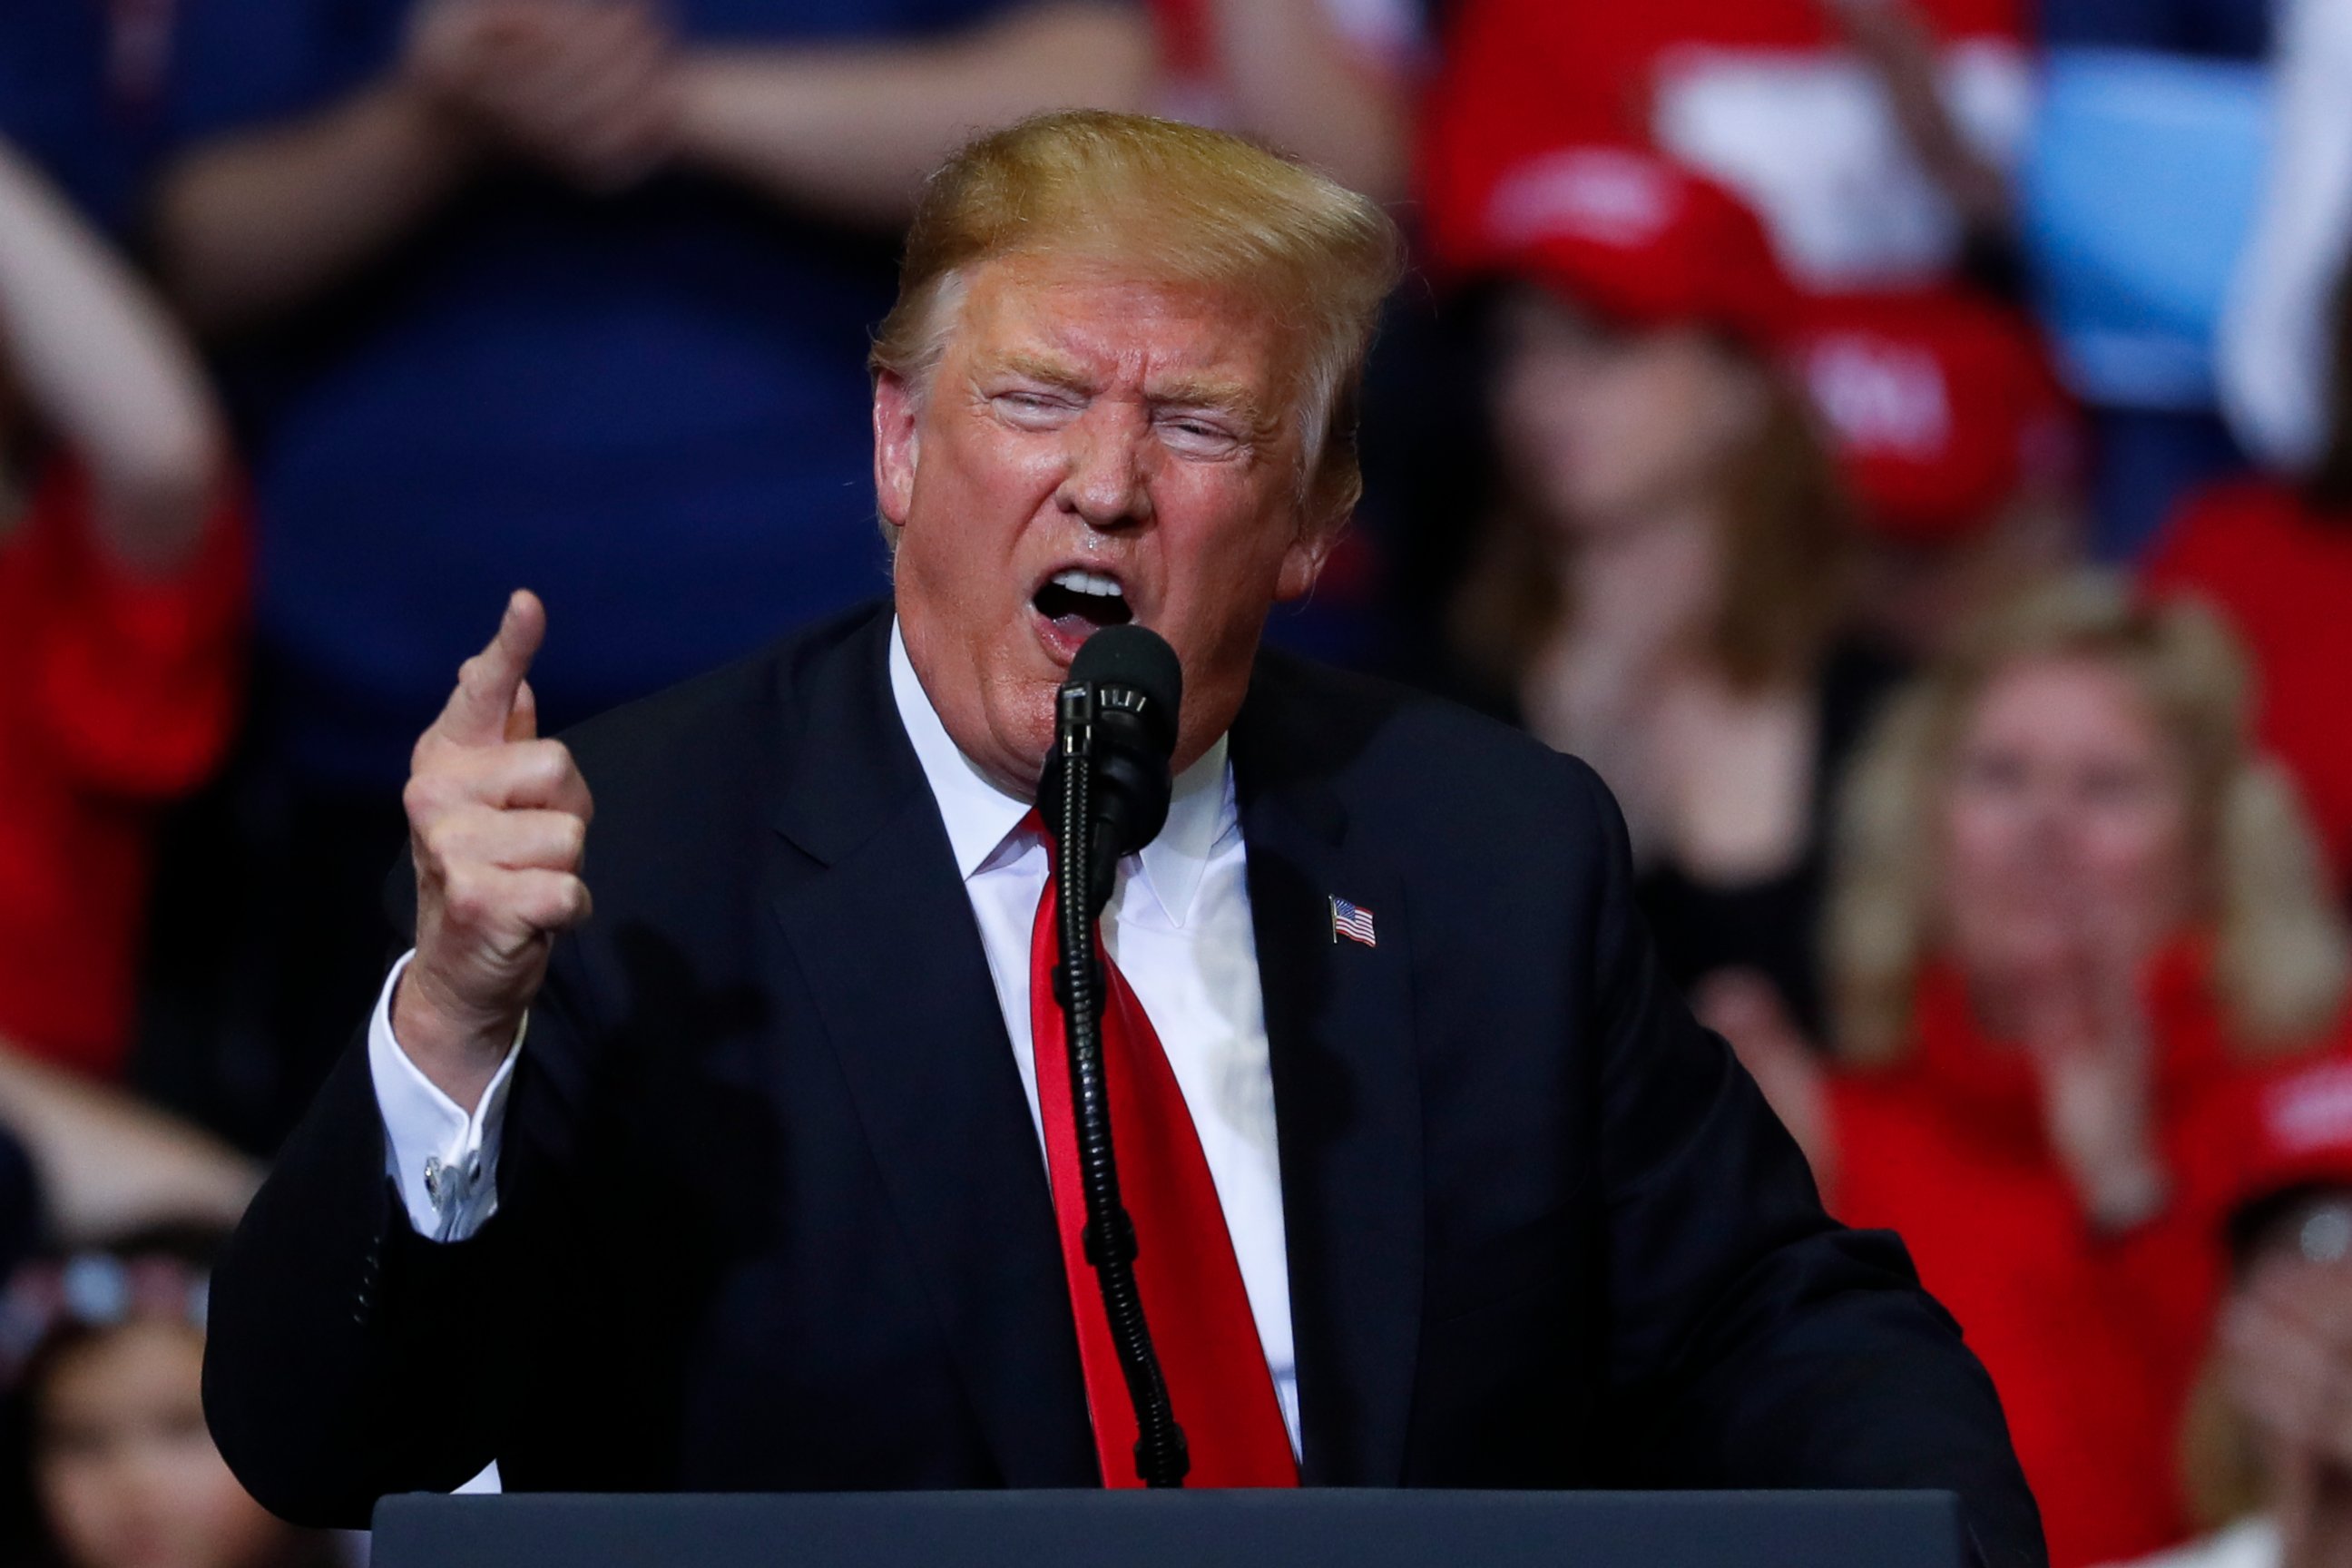 PHOTO: President Donald Trump speaks during a rally in Grand Rapids, Mich., Thursday, March 28, 2019.